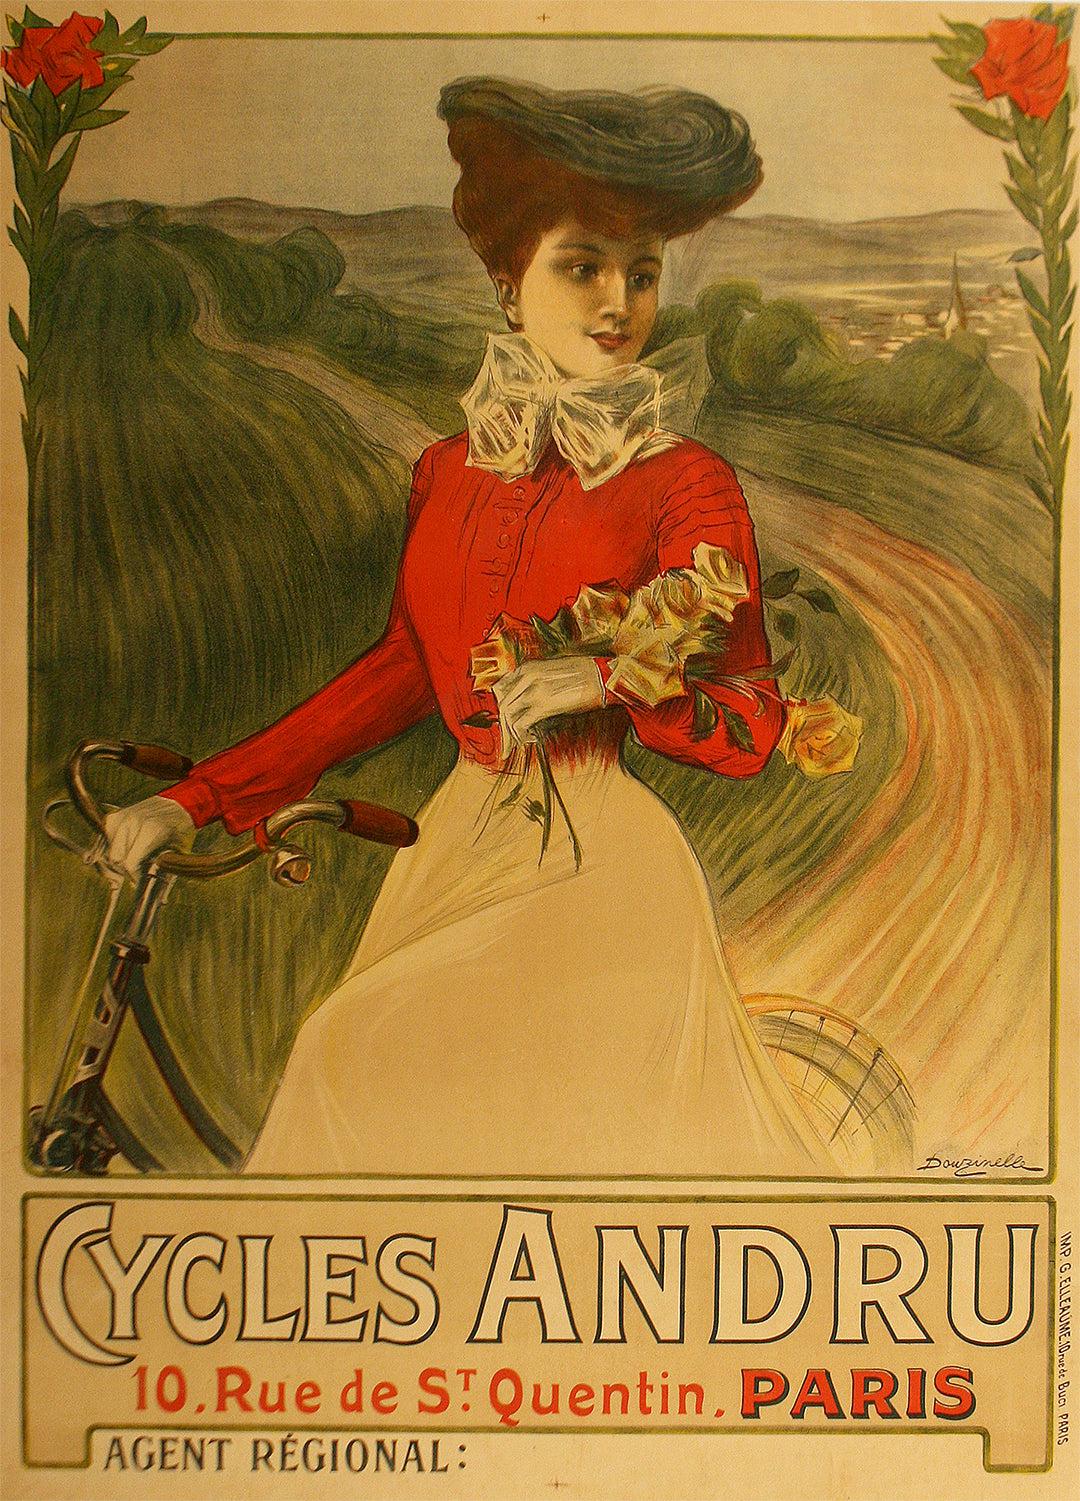 Original Vintage Cycles Andru Poster by Douzinelle c1900